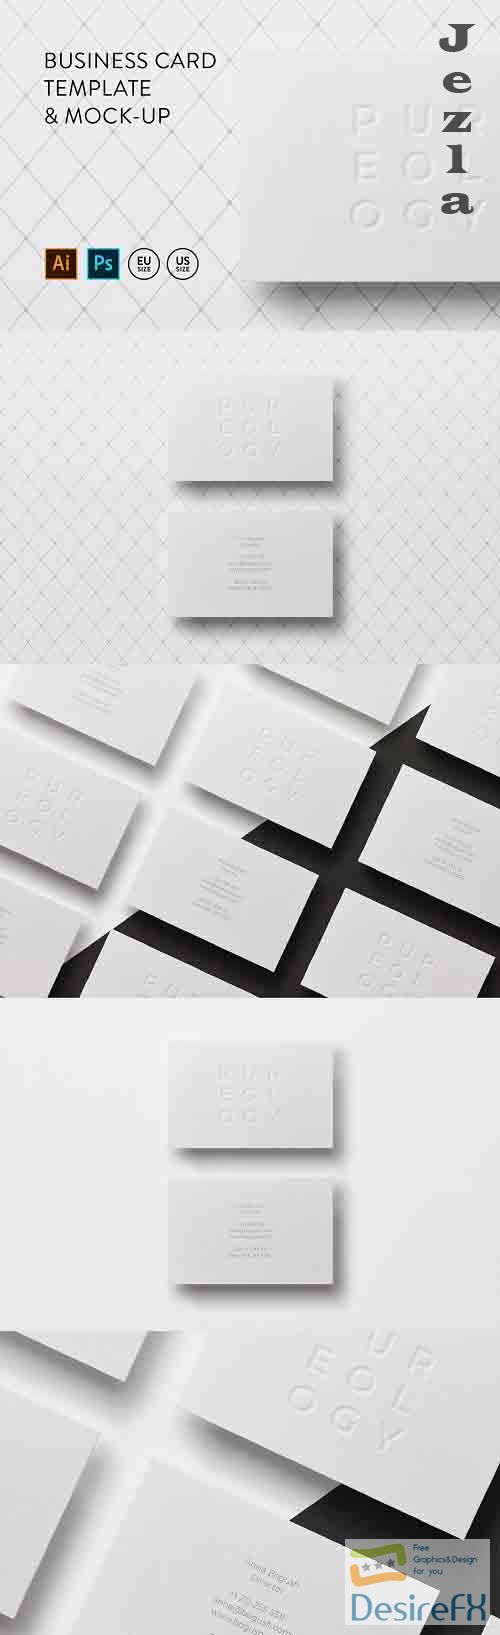 Business card Template & Mock-up #4 - 63942